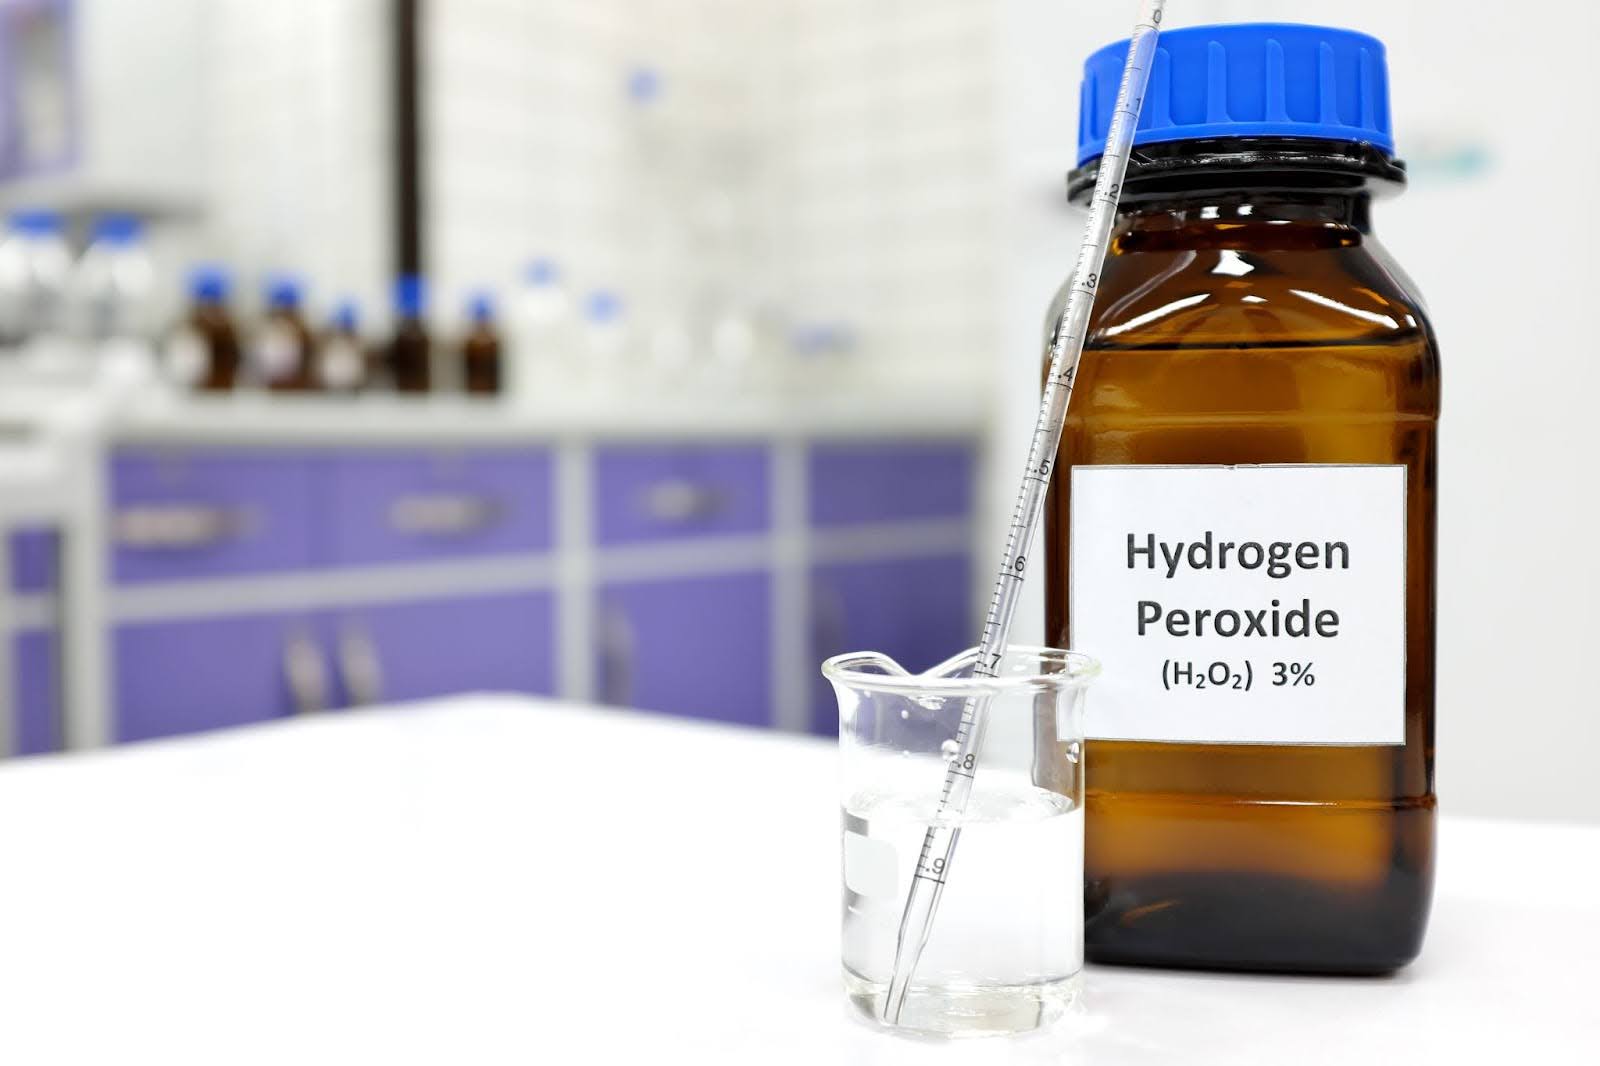 Toothache pain reliever for kids - hydrogen peroxide solution